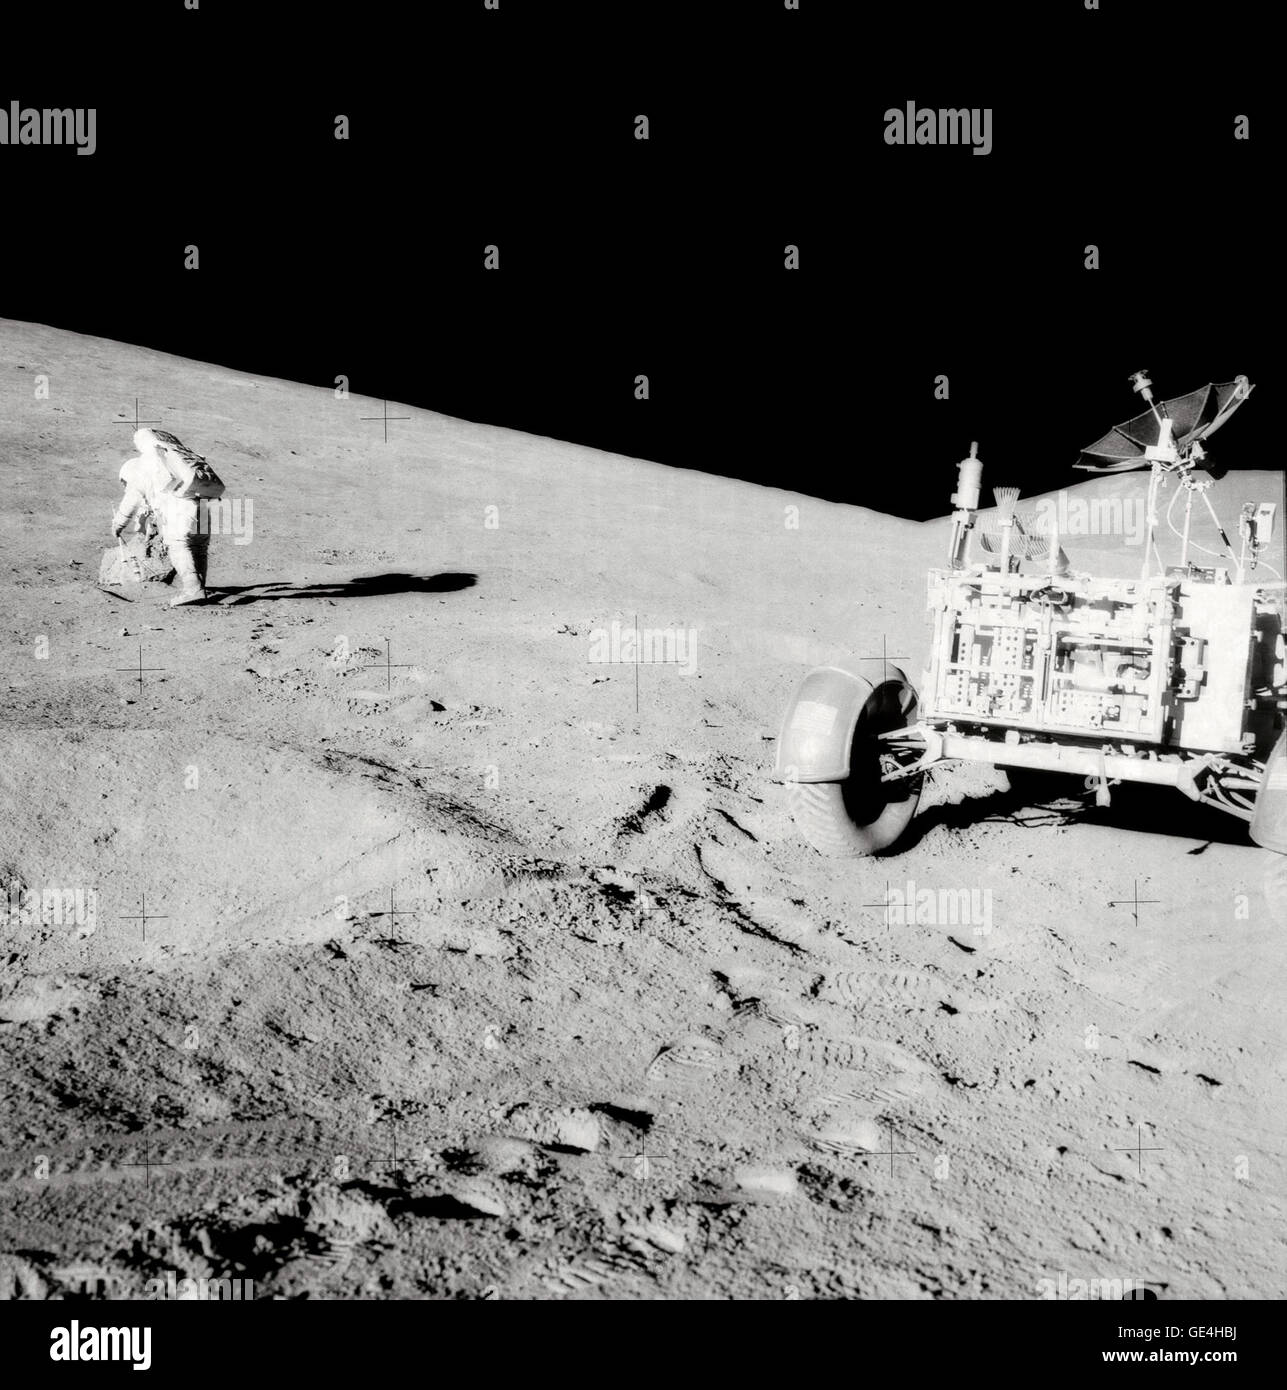 Astronaut David R. Scott, mission commander, with tongs and gnomon in hand, studies a boulder on the slope of Hadley Delta during the Apollo 15 lunar surface extravehicular activity. The Lunar Roving Vehicle (LRV) or Rover is in right foreground. View is looking slightly south of west. &quot;Bennett Hill&quot; is at extreme right. Astronaut James B. Irwin, lunar module pilot, took this photograph.   Image # : AS15-85-11437 Date: August 1, 1971 Stock Photo